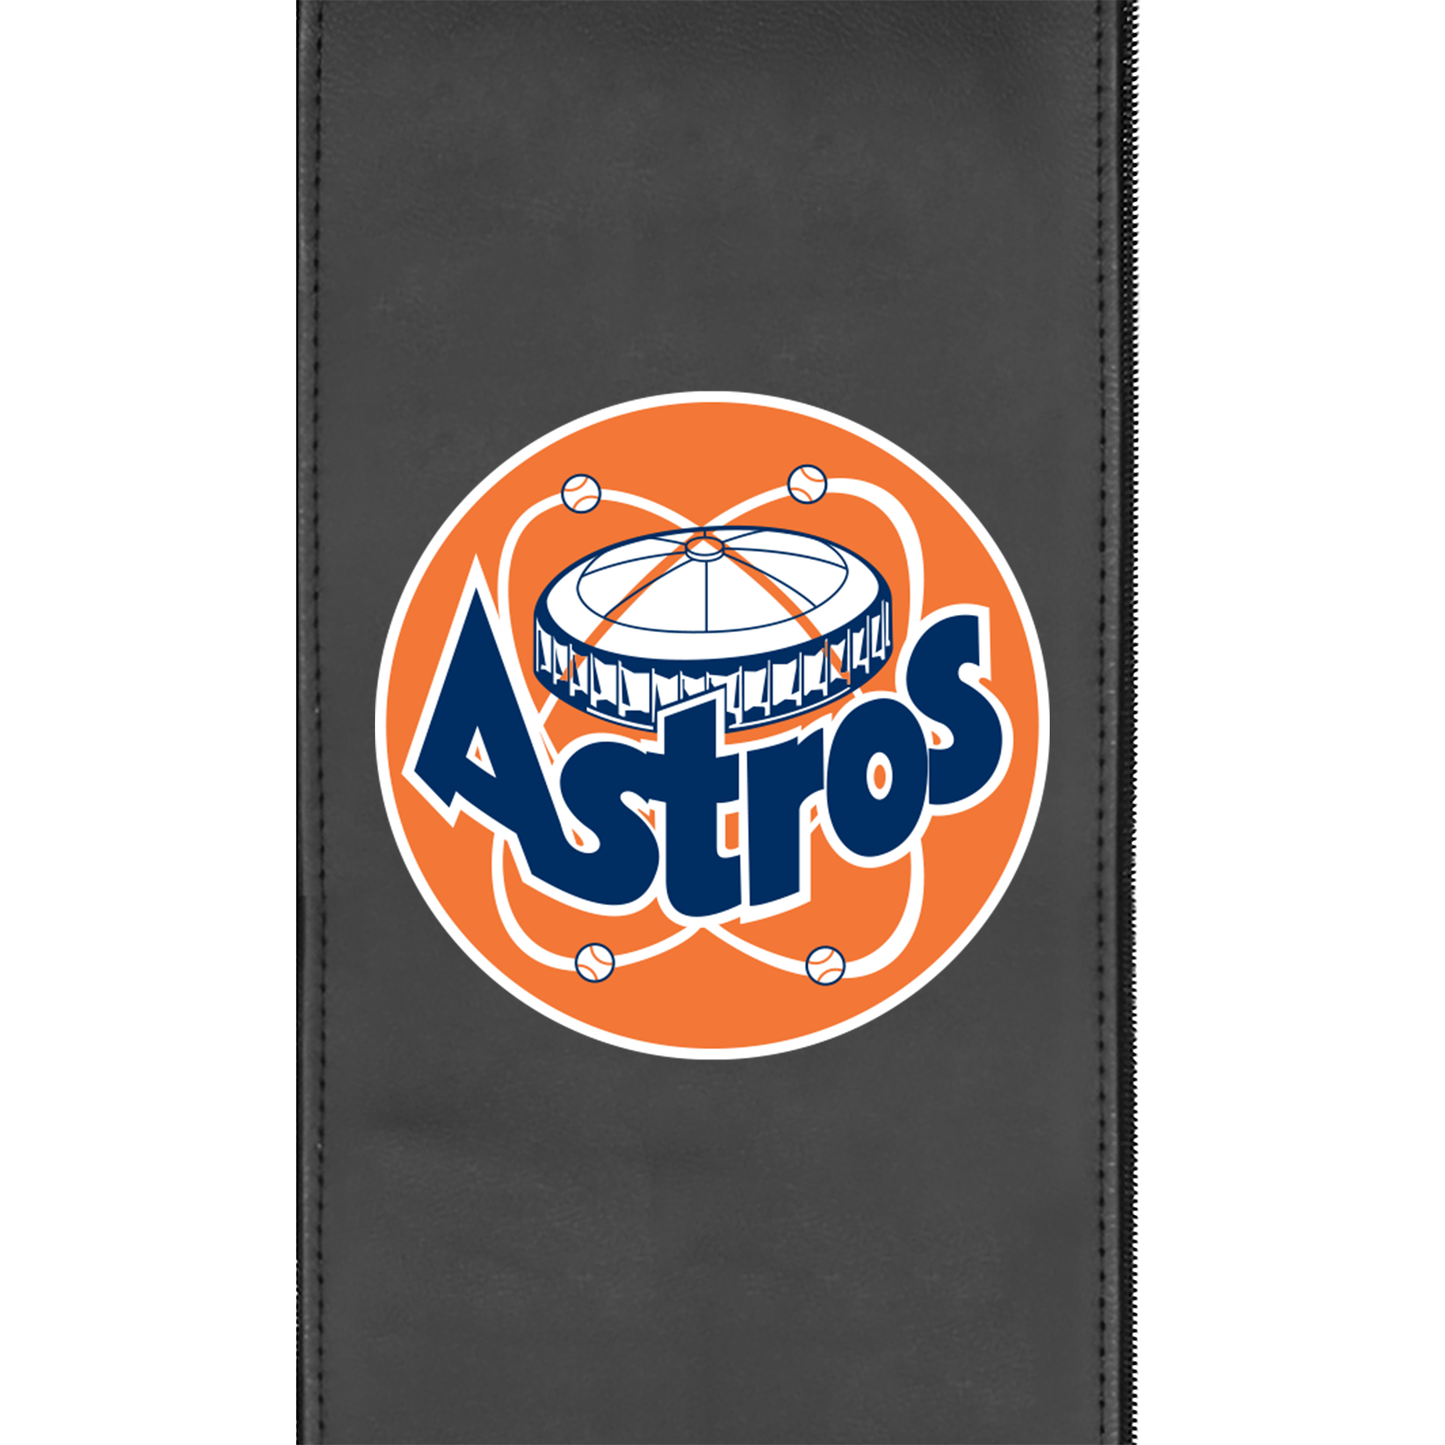 Game Rocker 100 with Houston Astros Cooperstown Logo